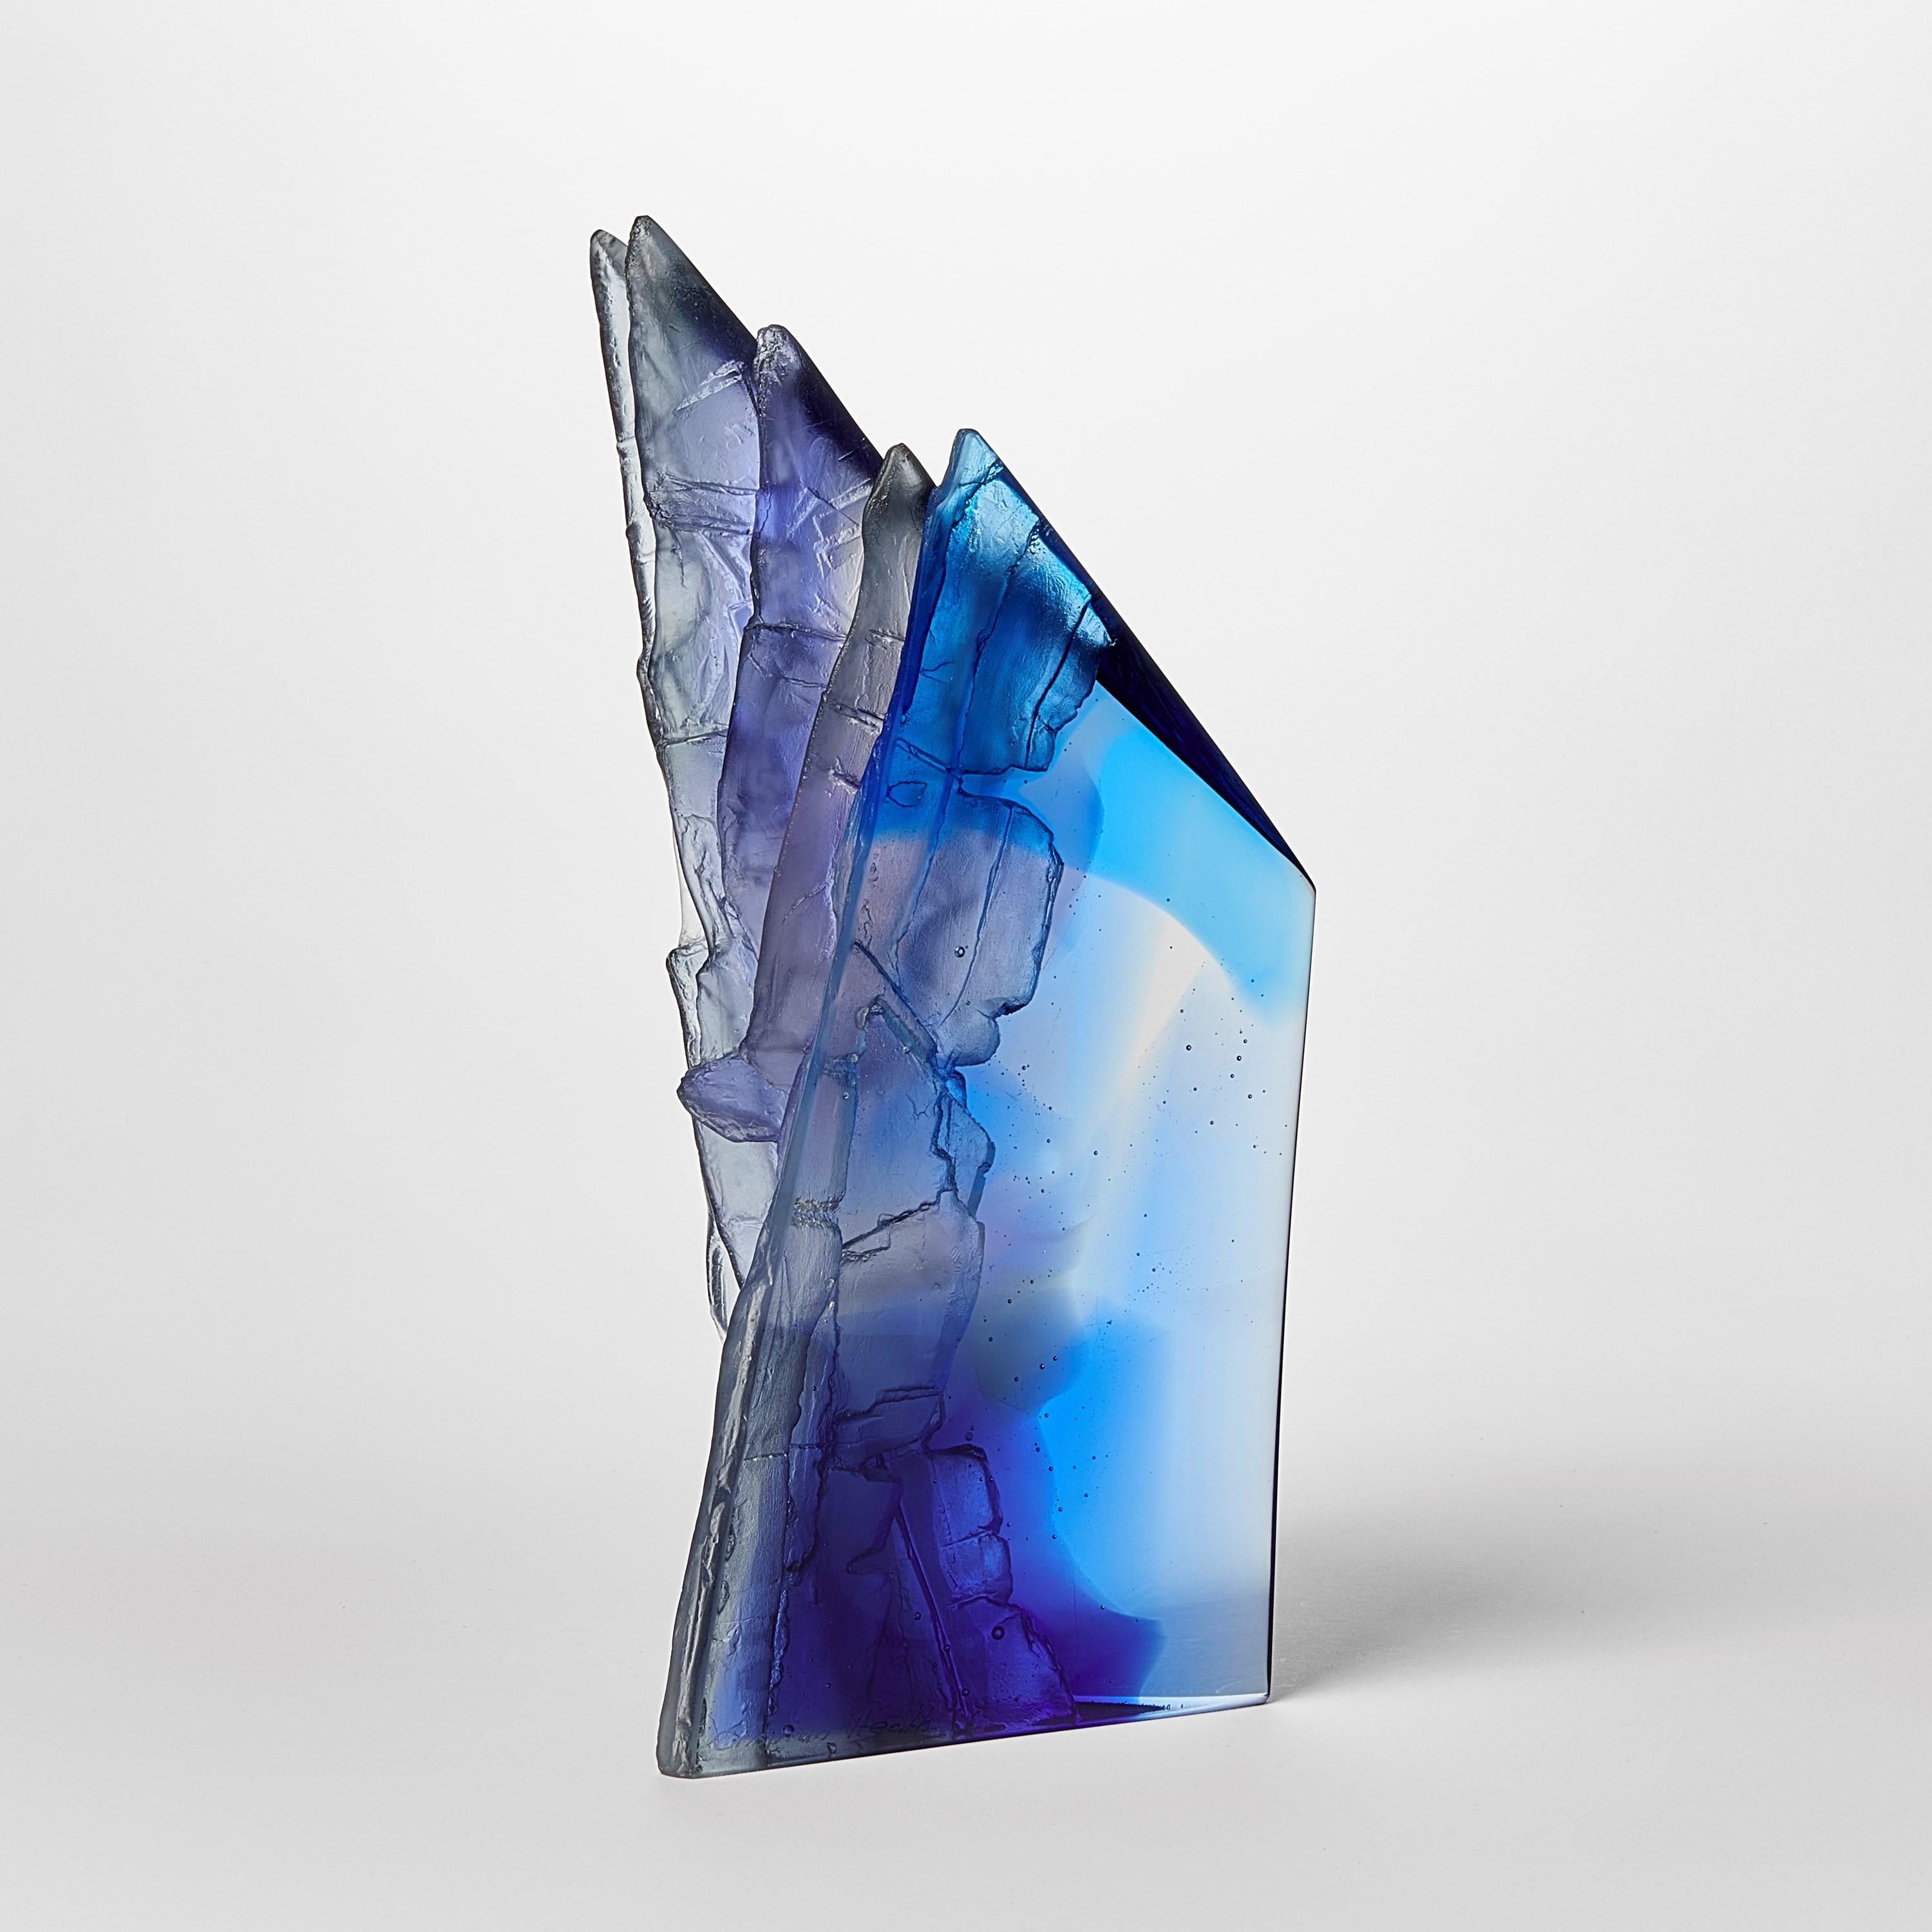 British Deep Blue Cliff II, a textured cliff inspired glass sculpture by Crispian Heath For Sale